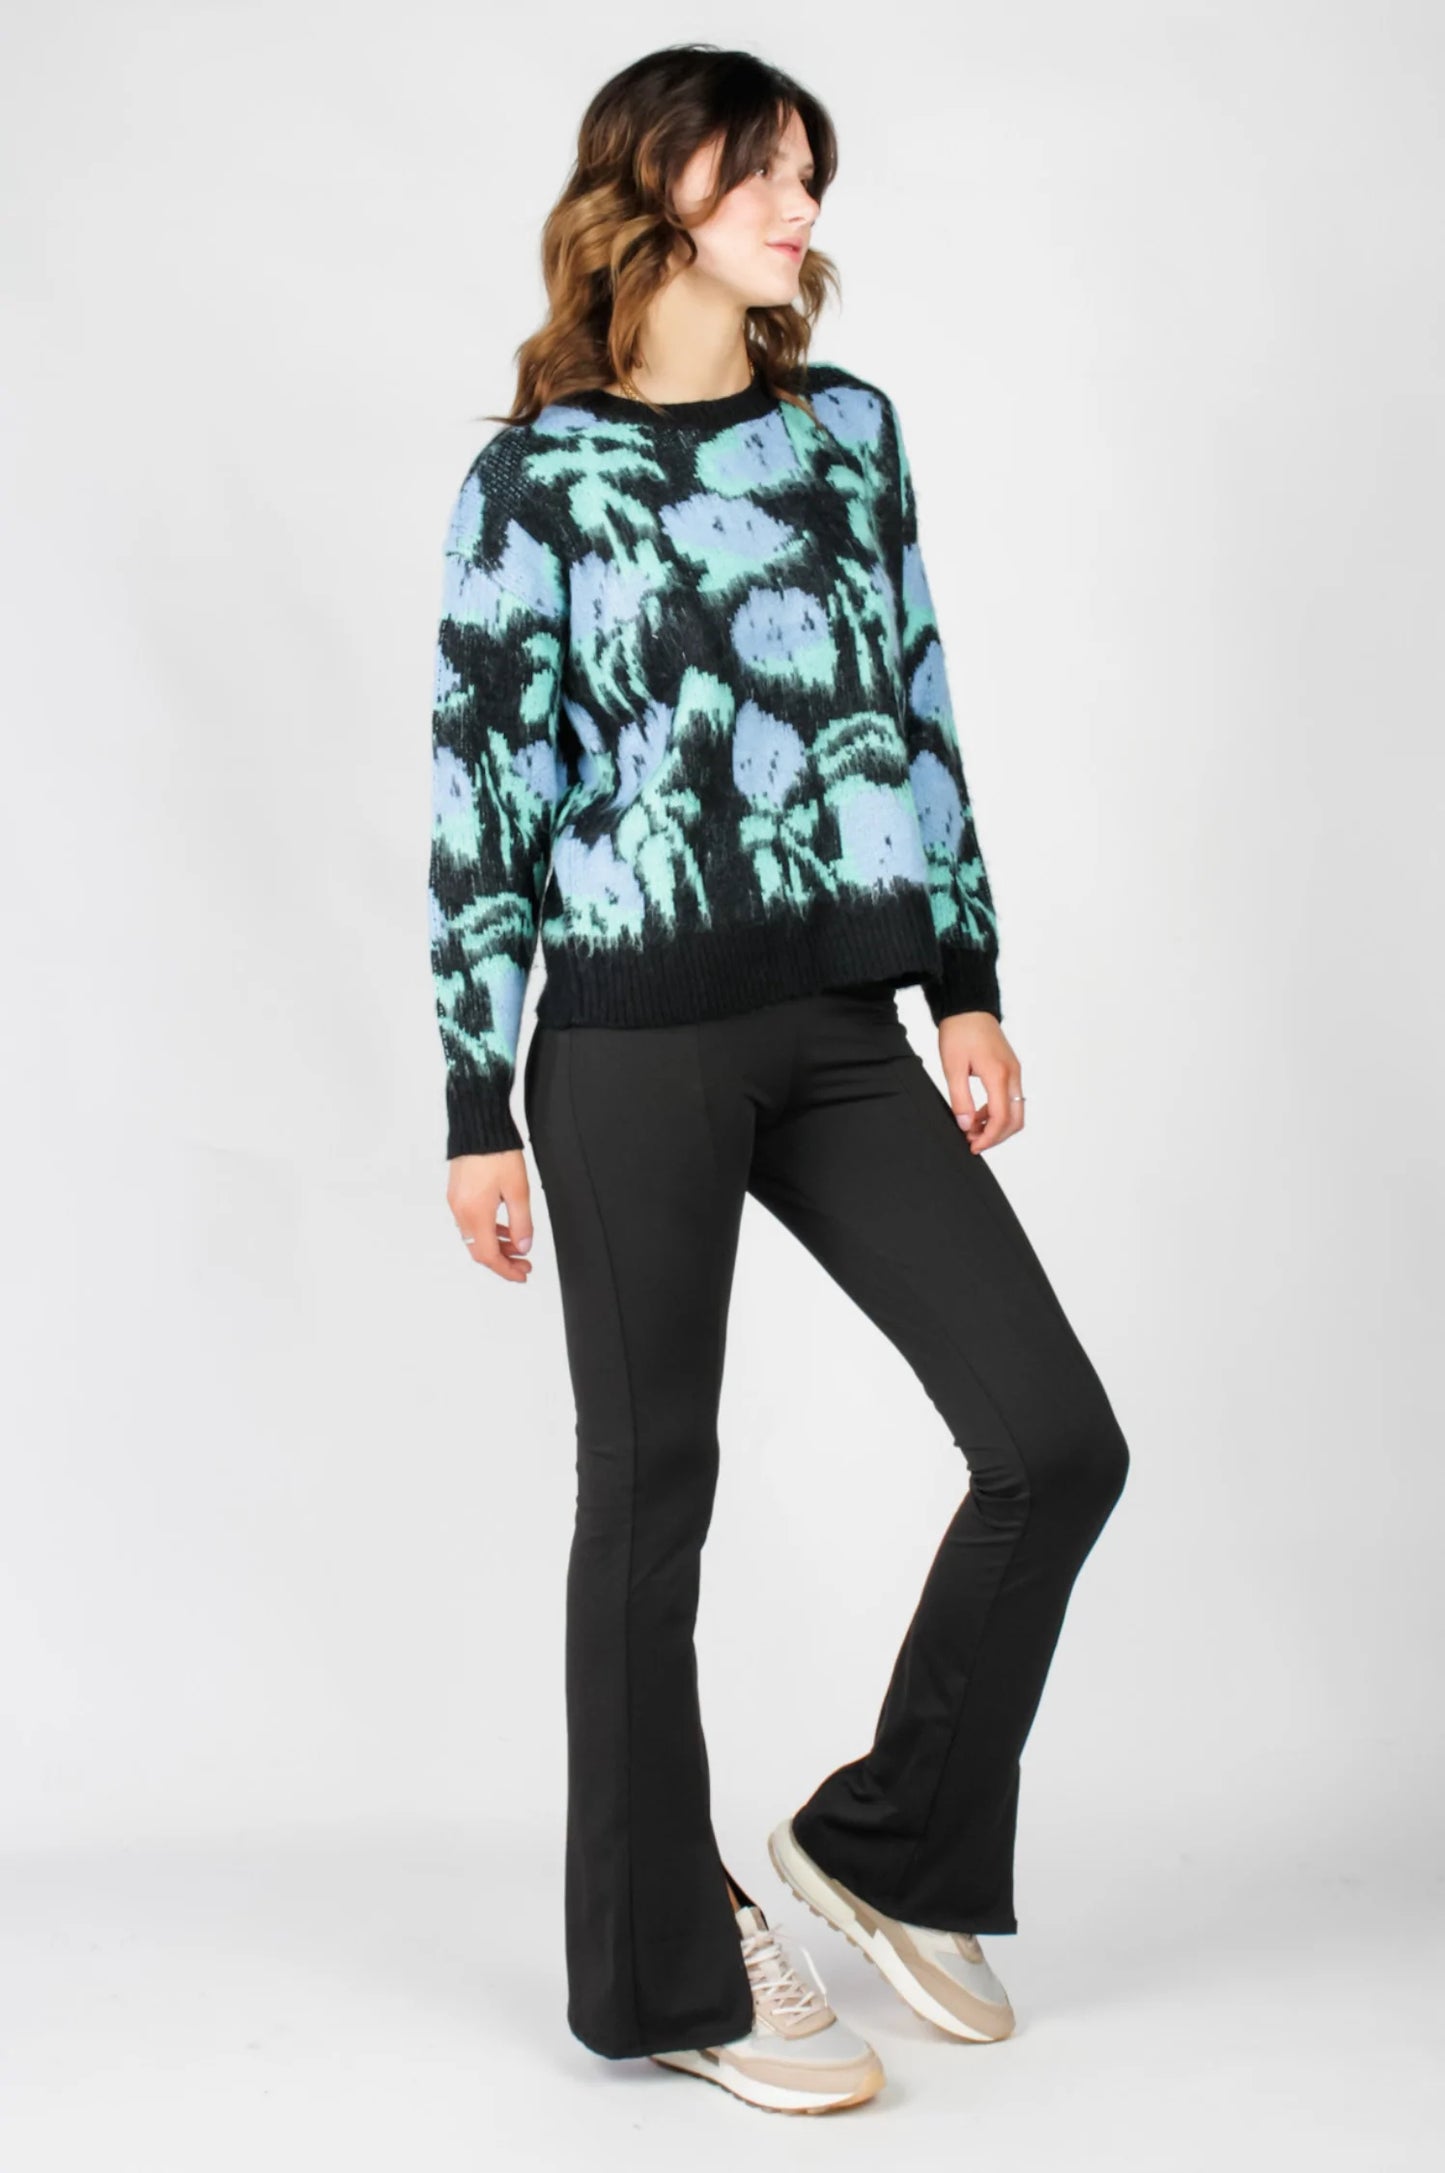 Dahlia Abstract Floral Pattern Crewneck Sweater